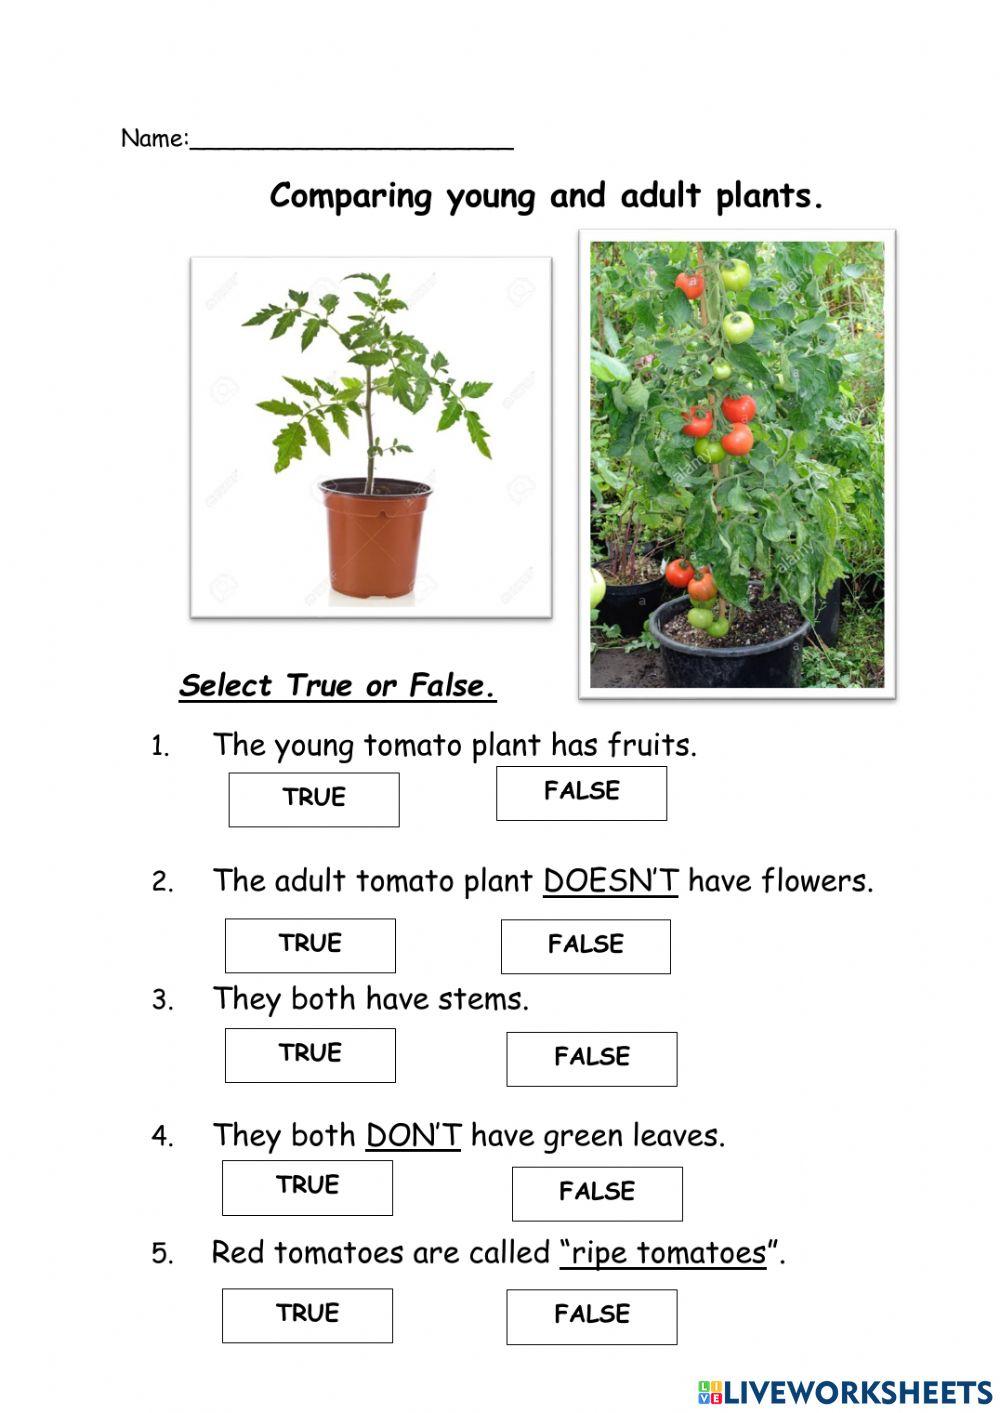 Comparing young and adult plants.